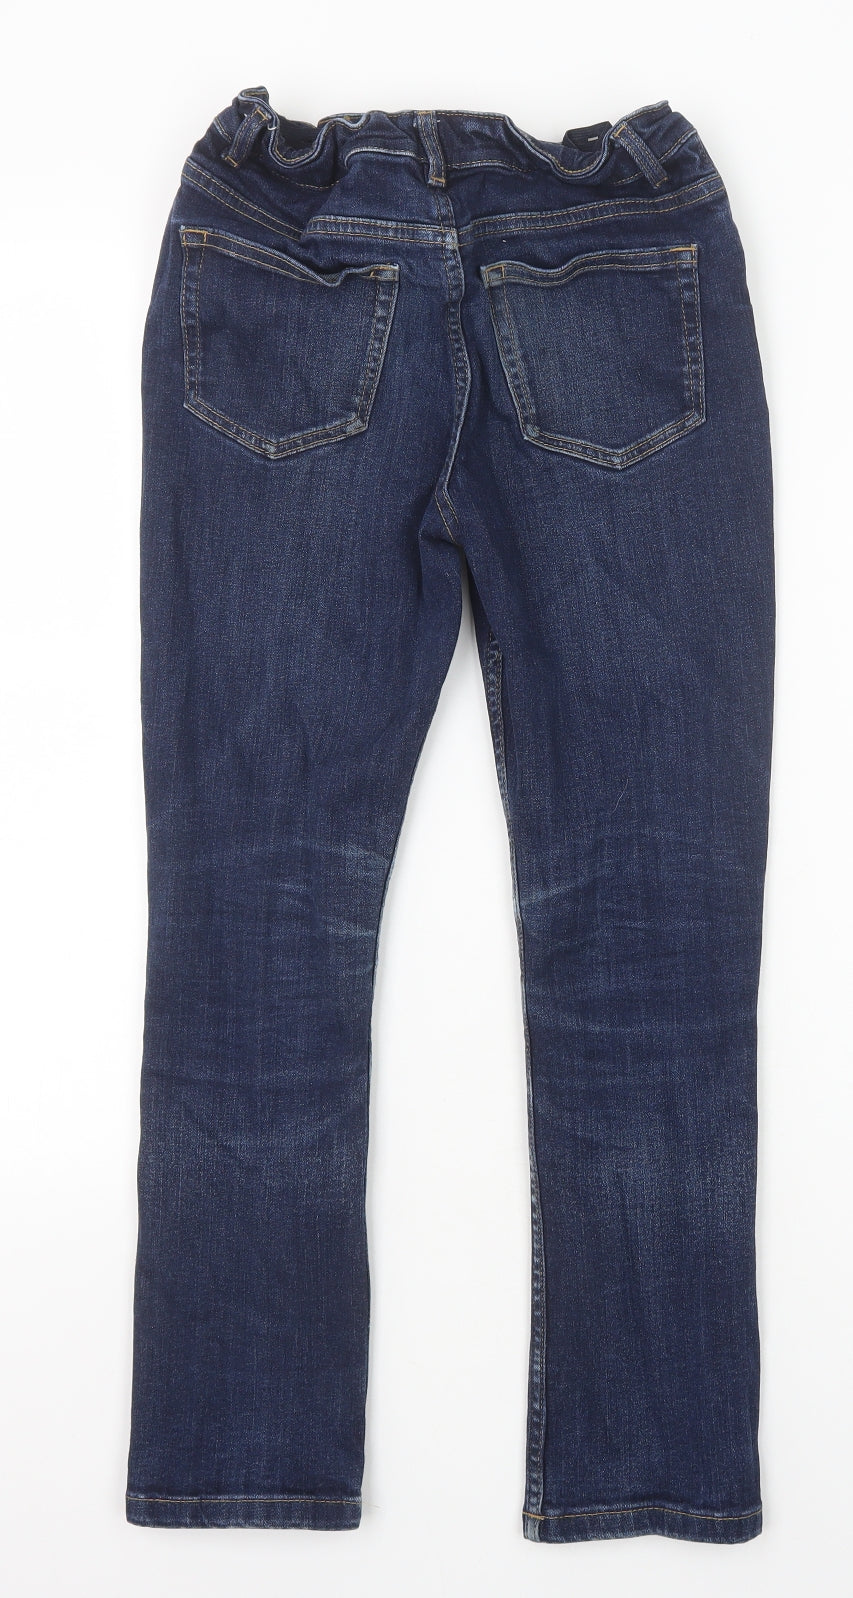 Marks and Spencer Girls Blue Cotton Straight Jeans Size 11-12 Years Slim Zip